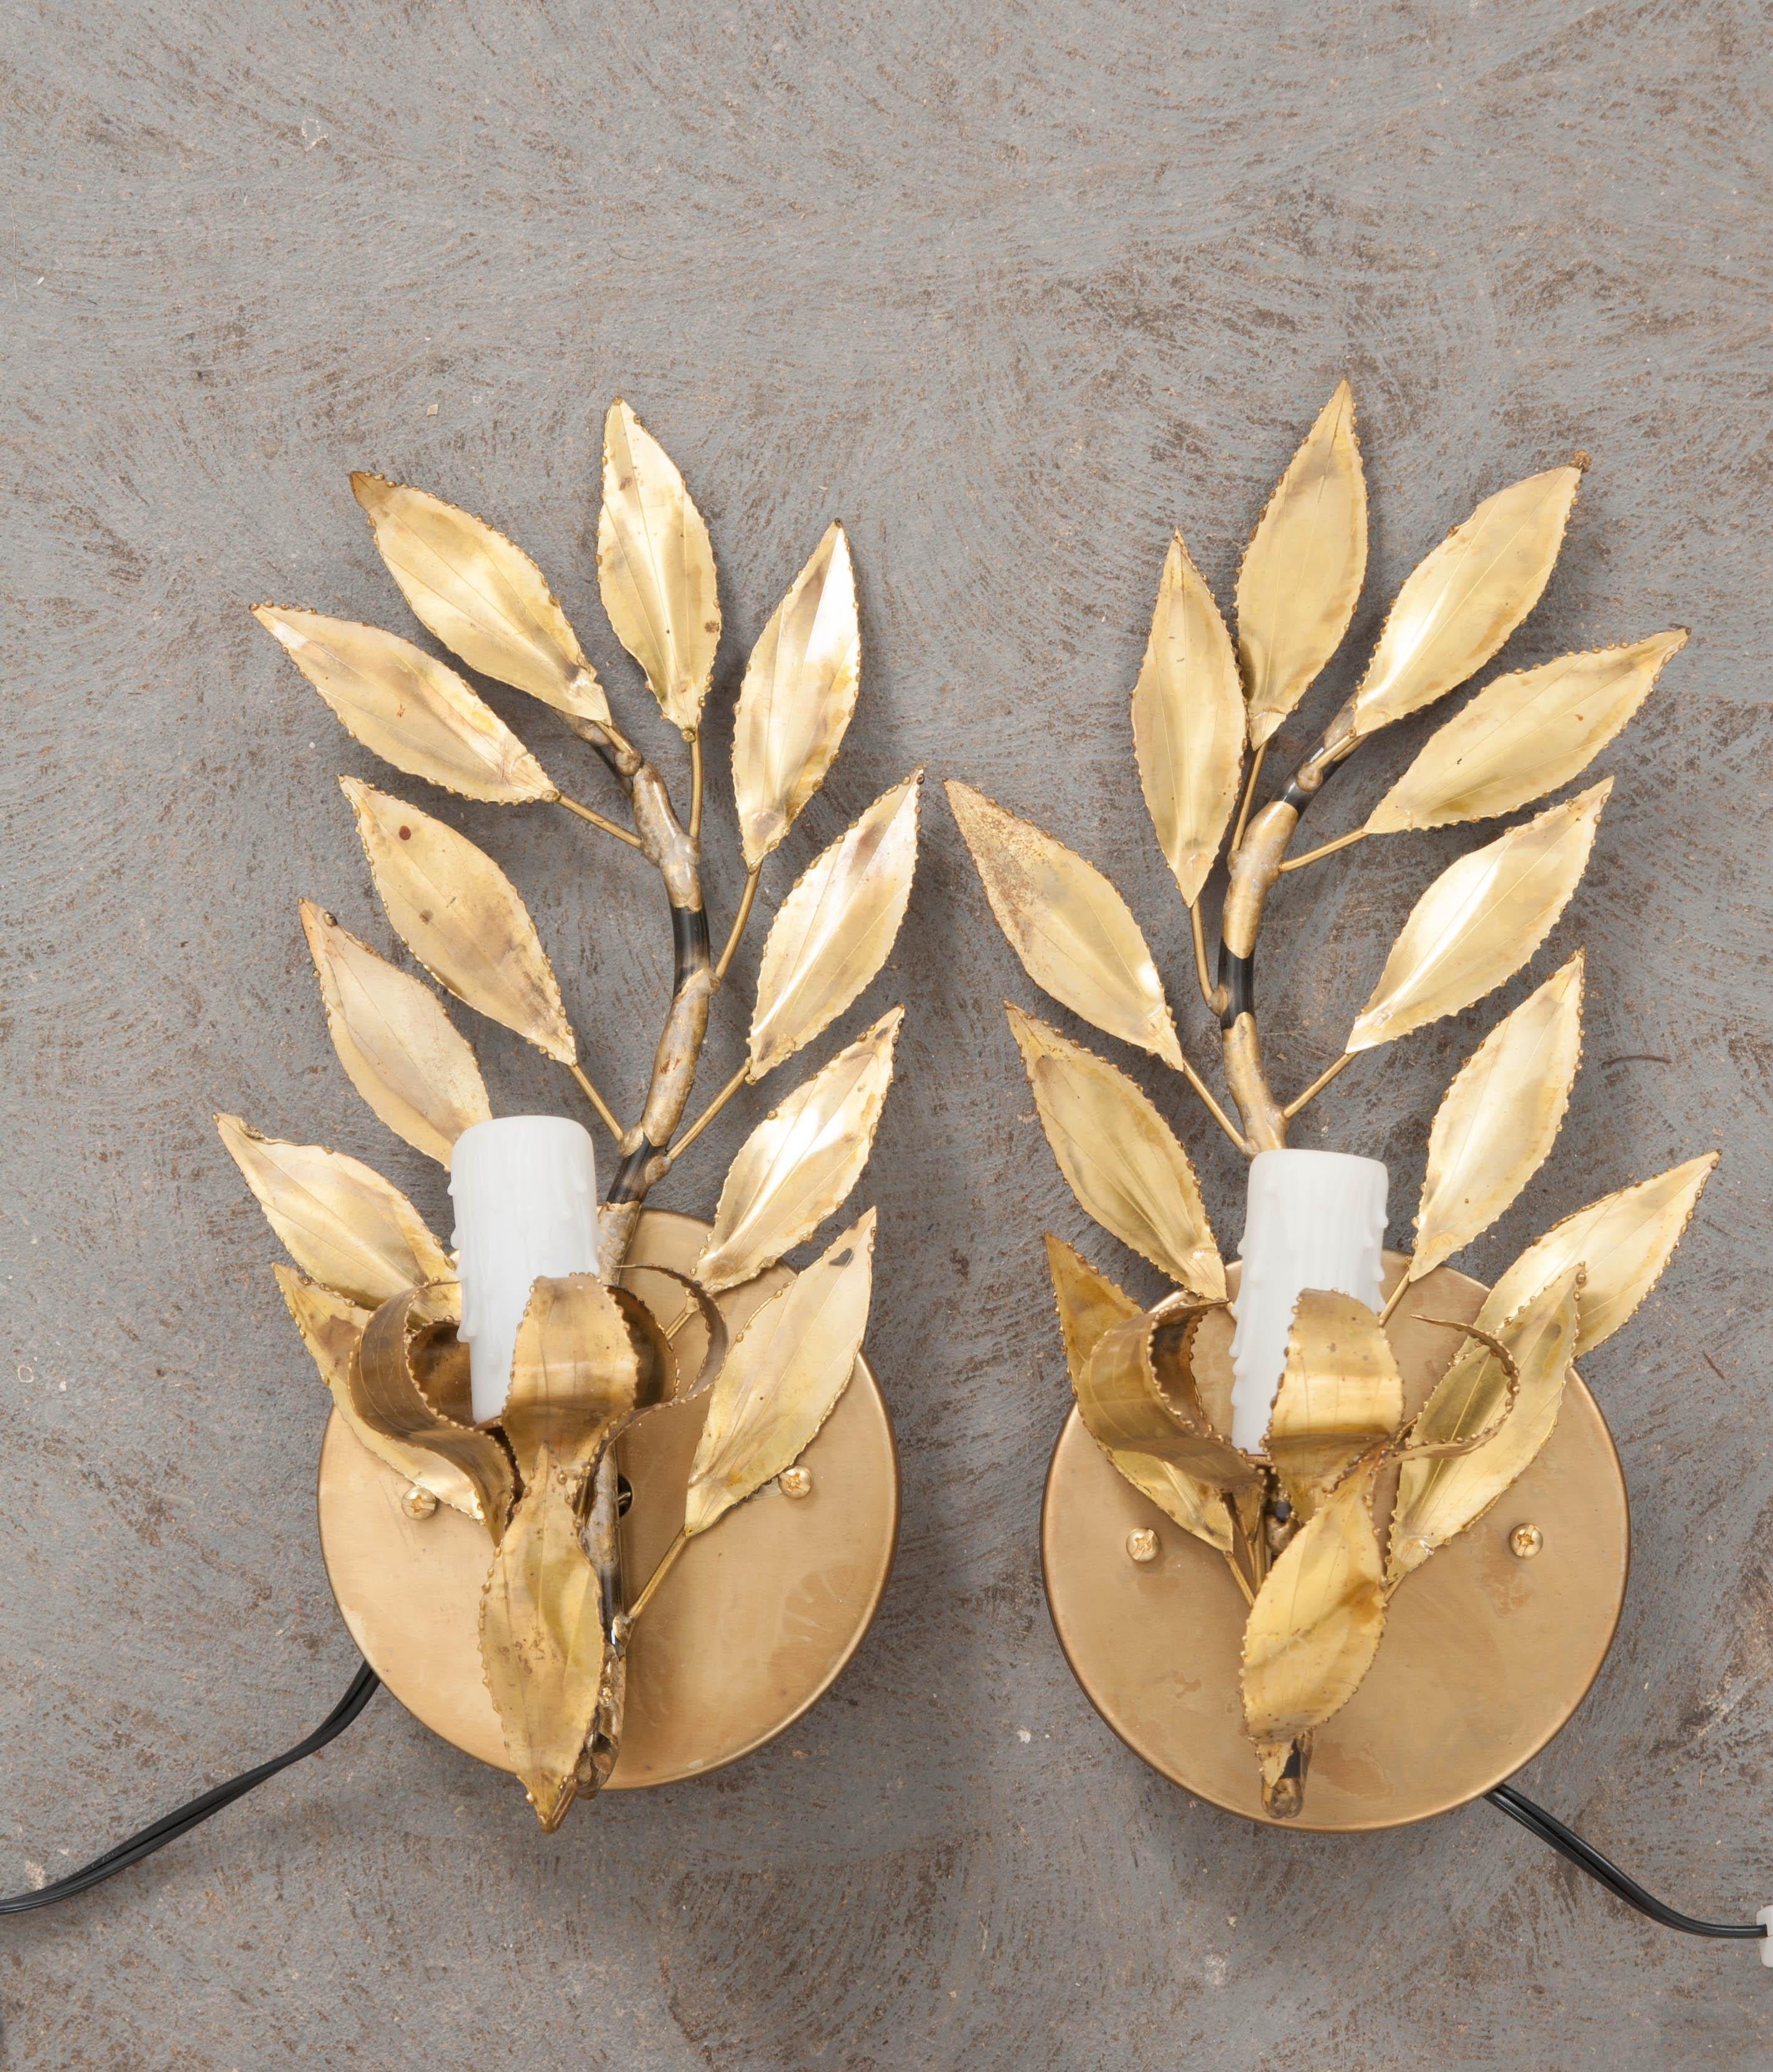 A fabulous pair of French vintage gilt-brass “laurel leaf” single-arm sconces, circa 1970s, each light fashioned to appear as if sitting upon a melted candlestick.